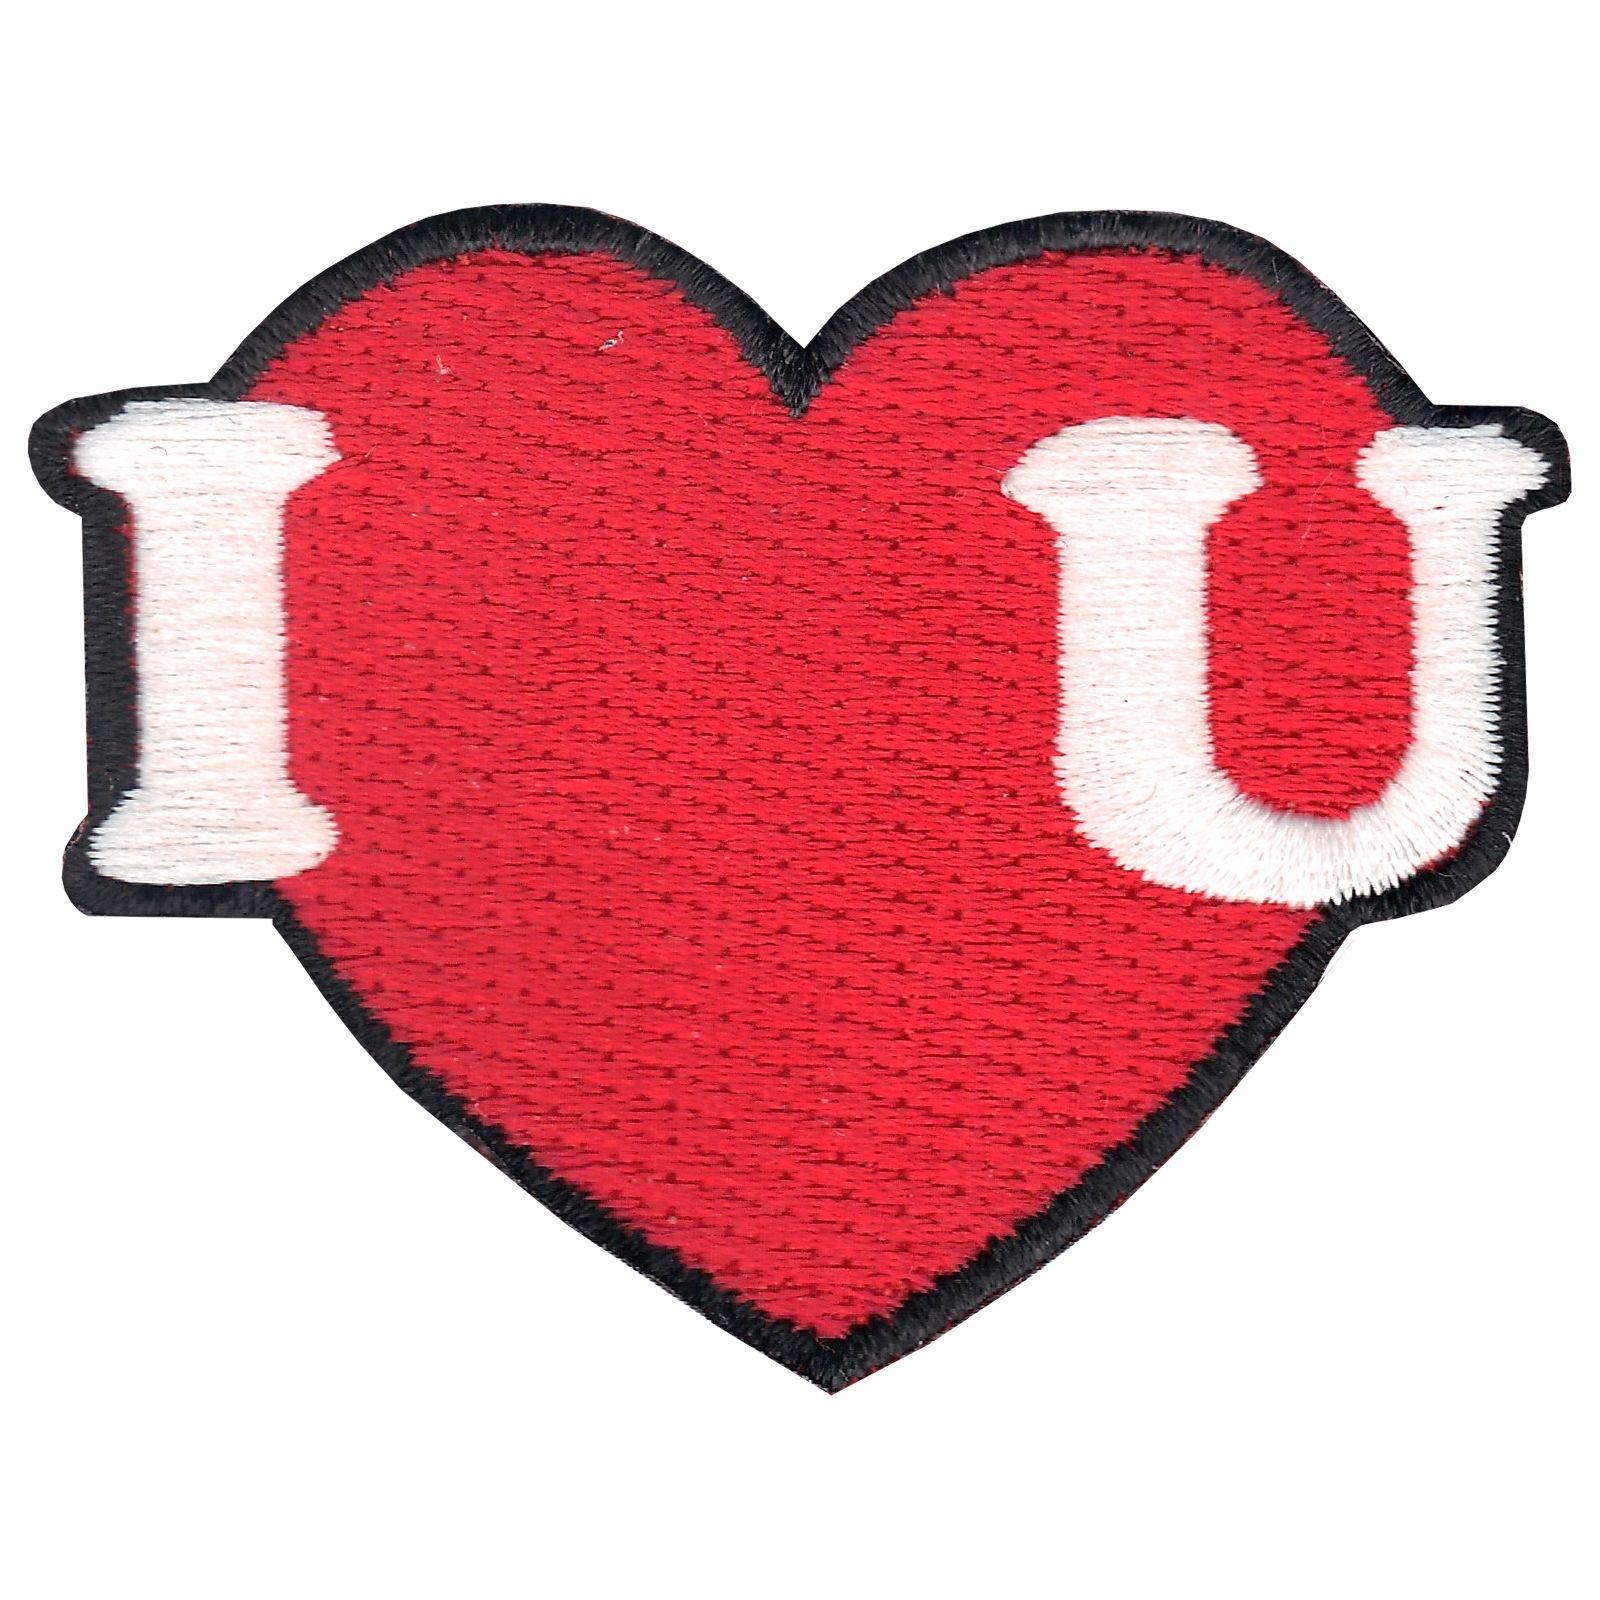 I Love You Heart Logo - I love You Heart Emoji Iron On Embroidered Applique Patch Set ...